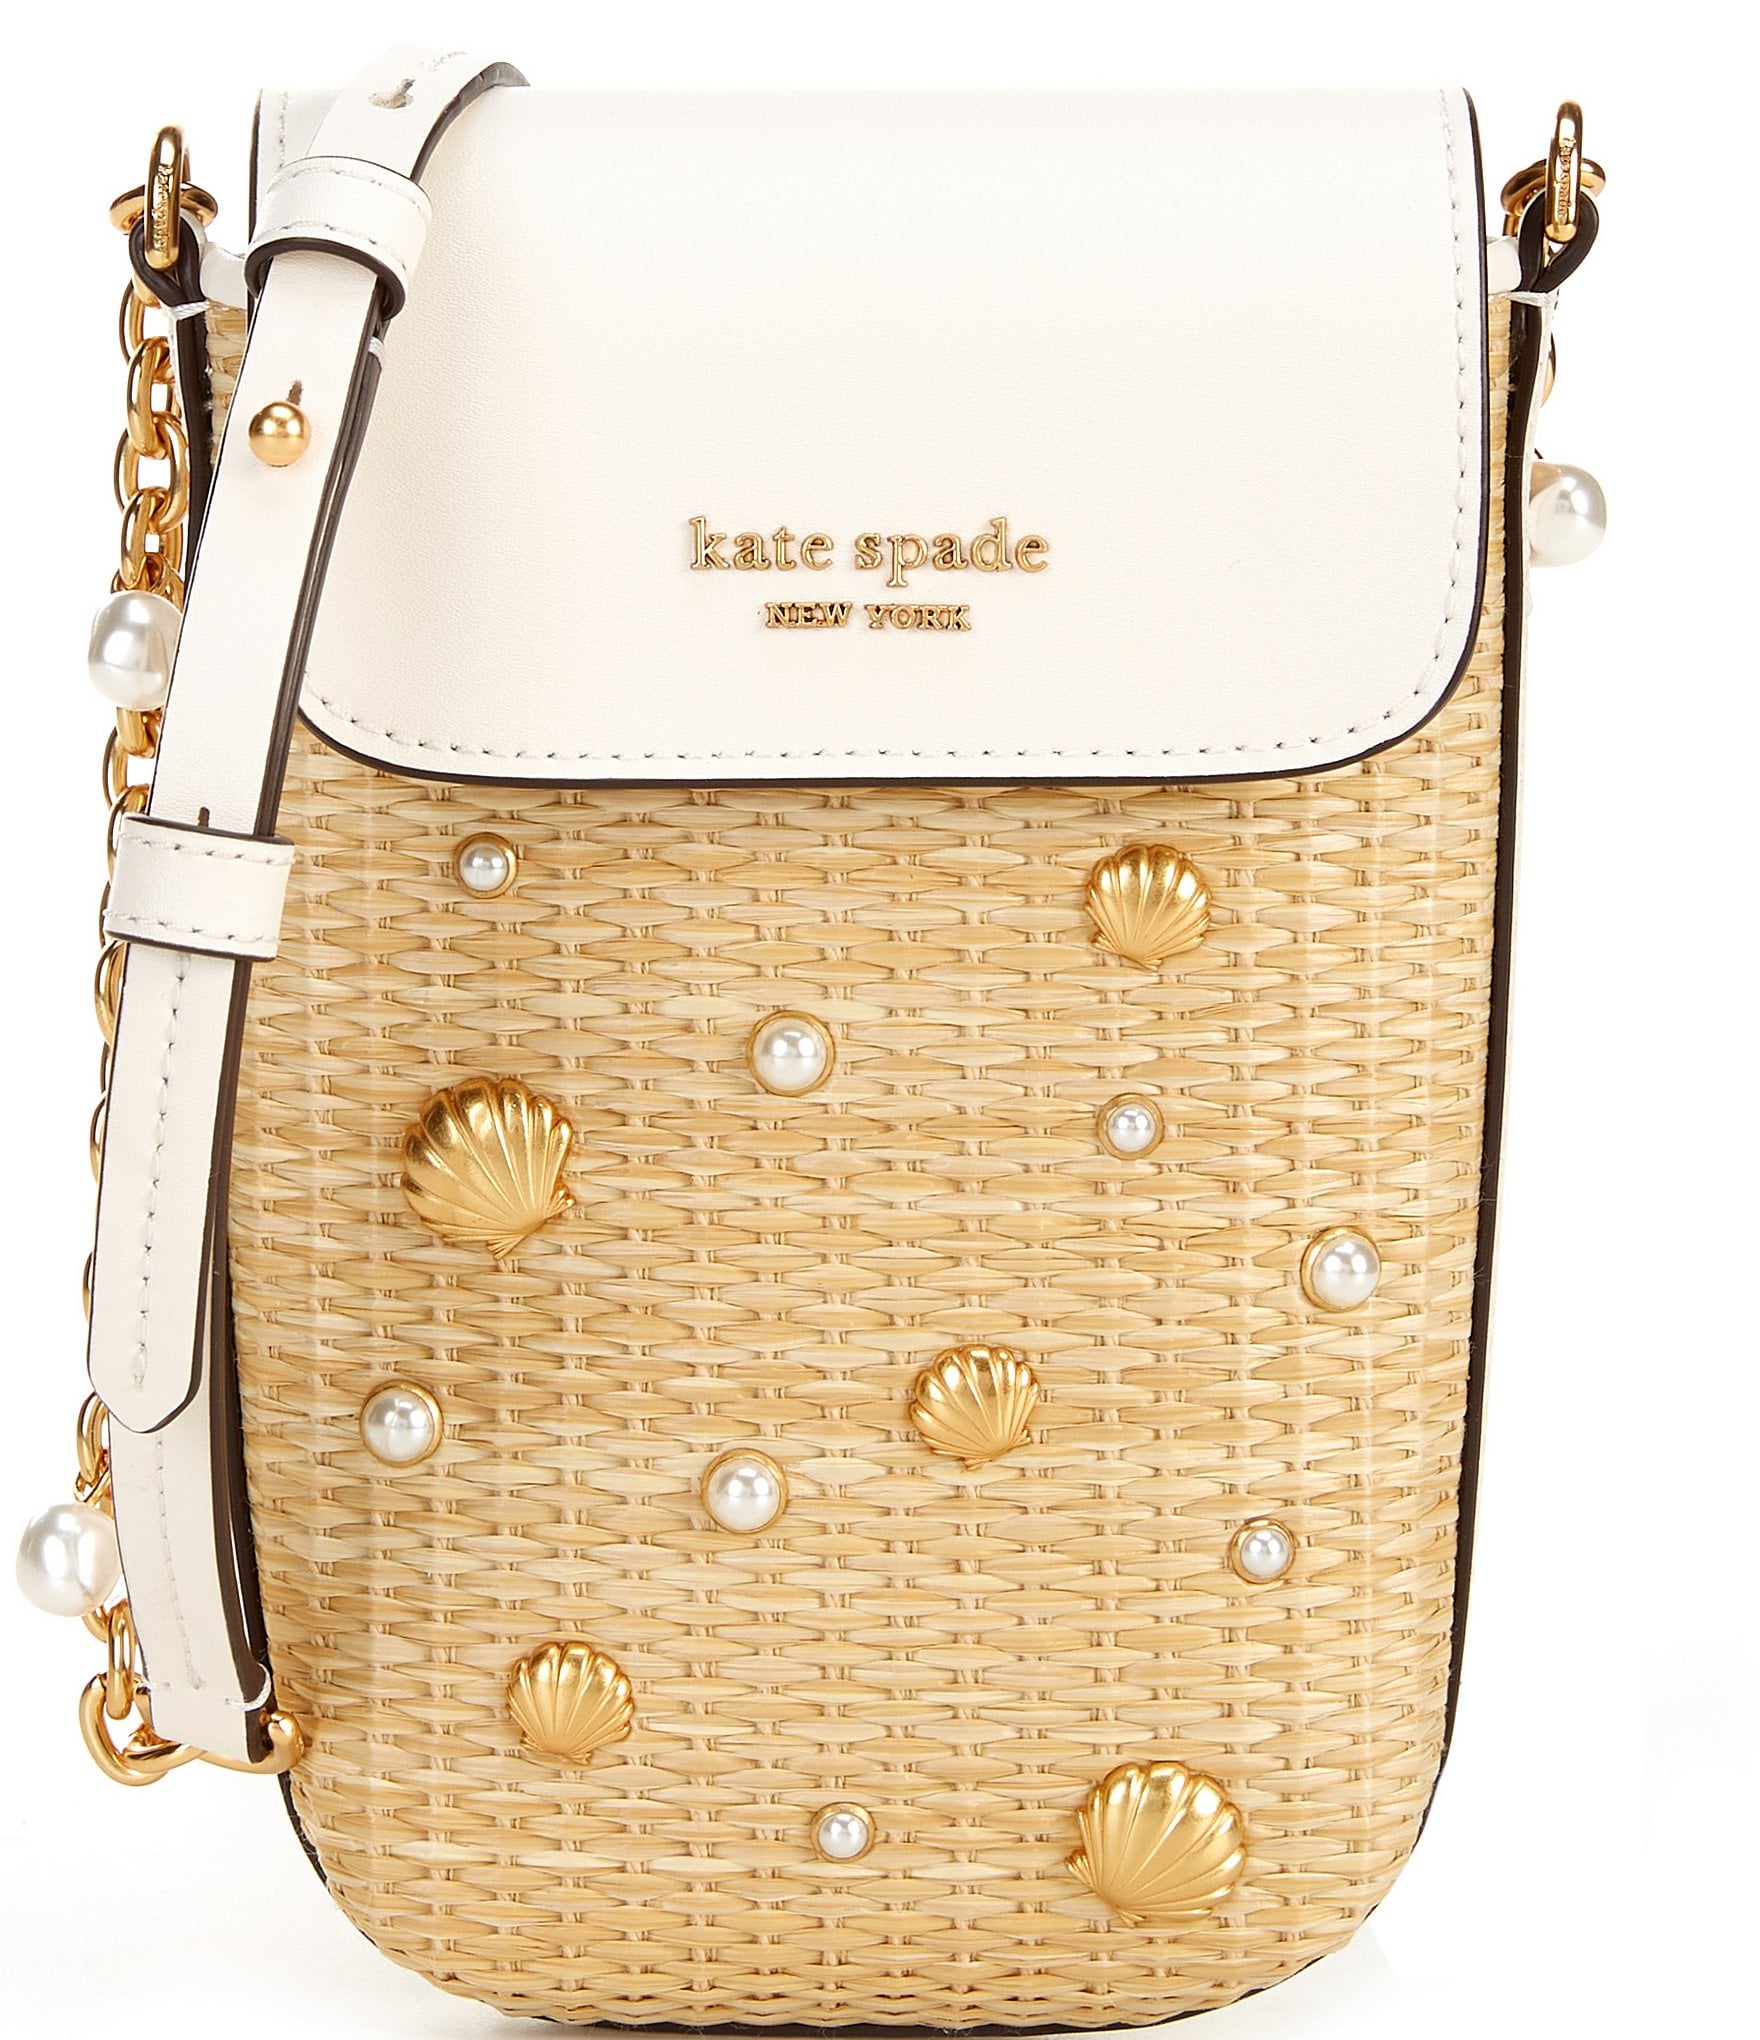 Kate Spade Chelsea Rose Toss North South Crossbody - ShopStyle